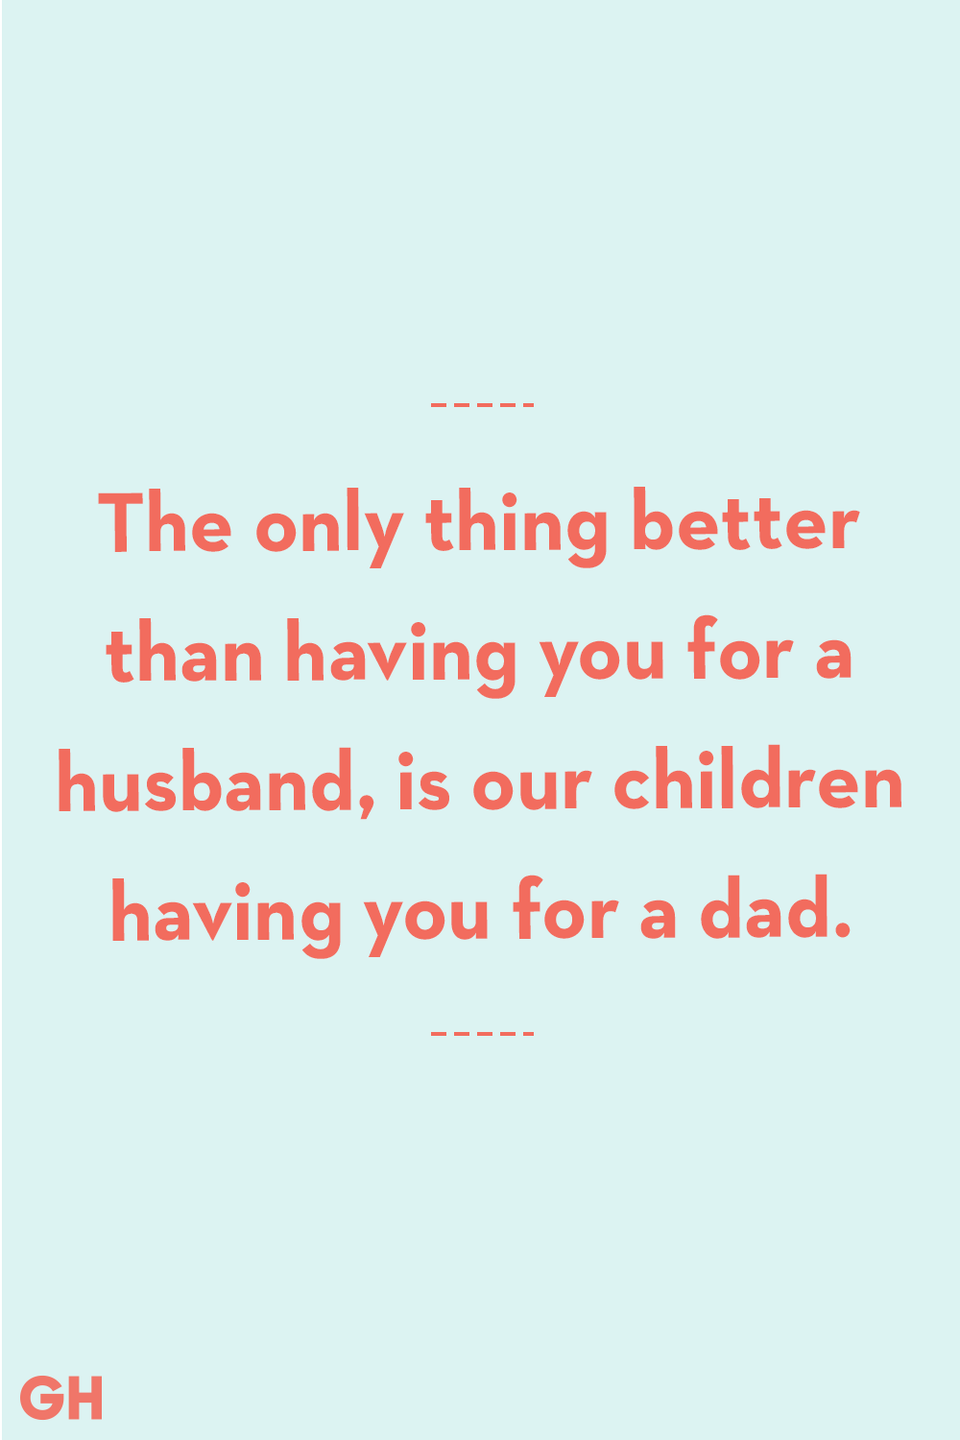 <p>The only thing better than having you for a husband, is our children having you for a dad.</p>